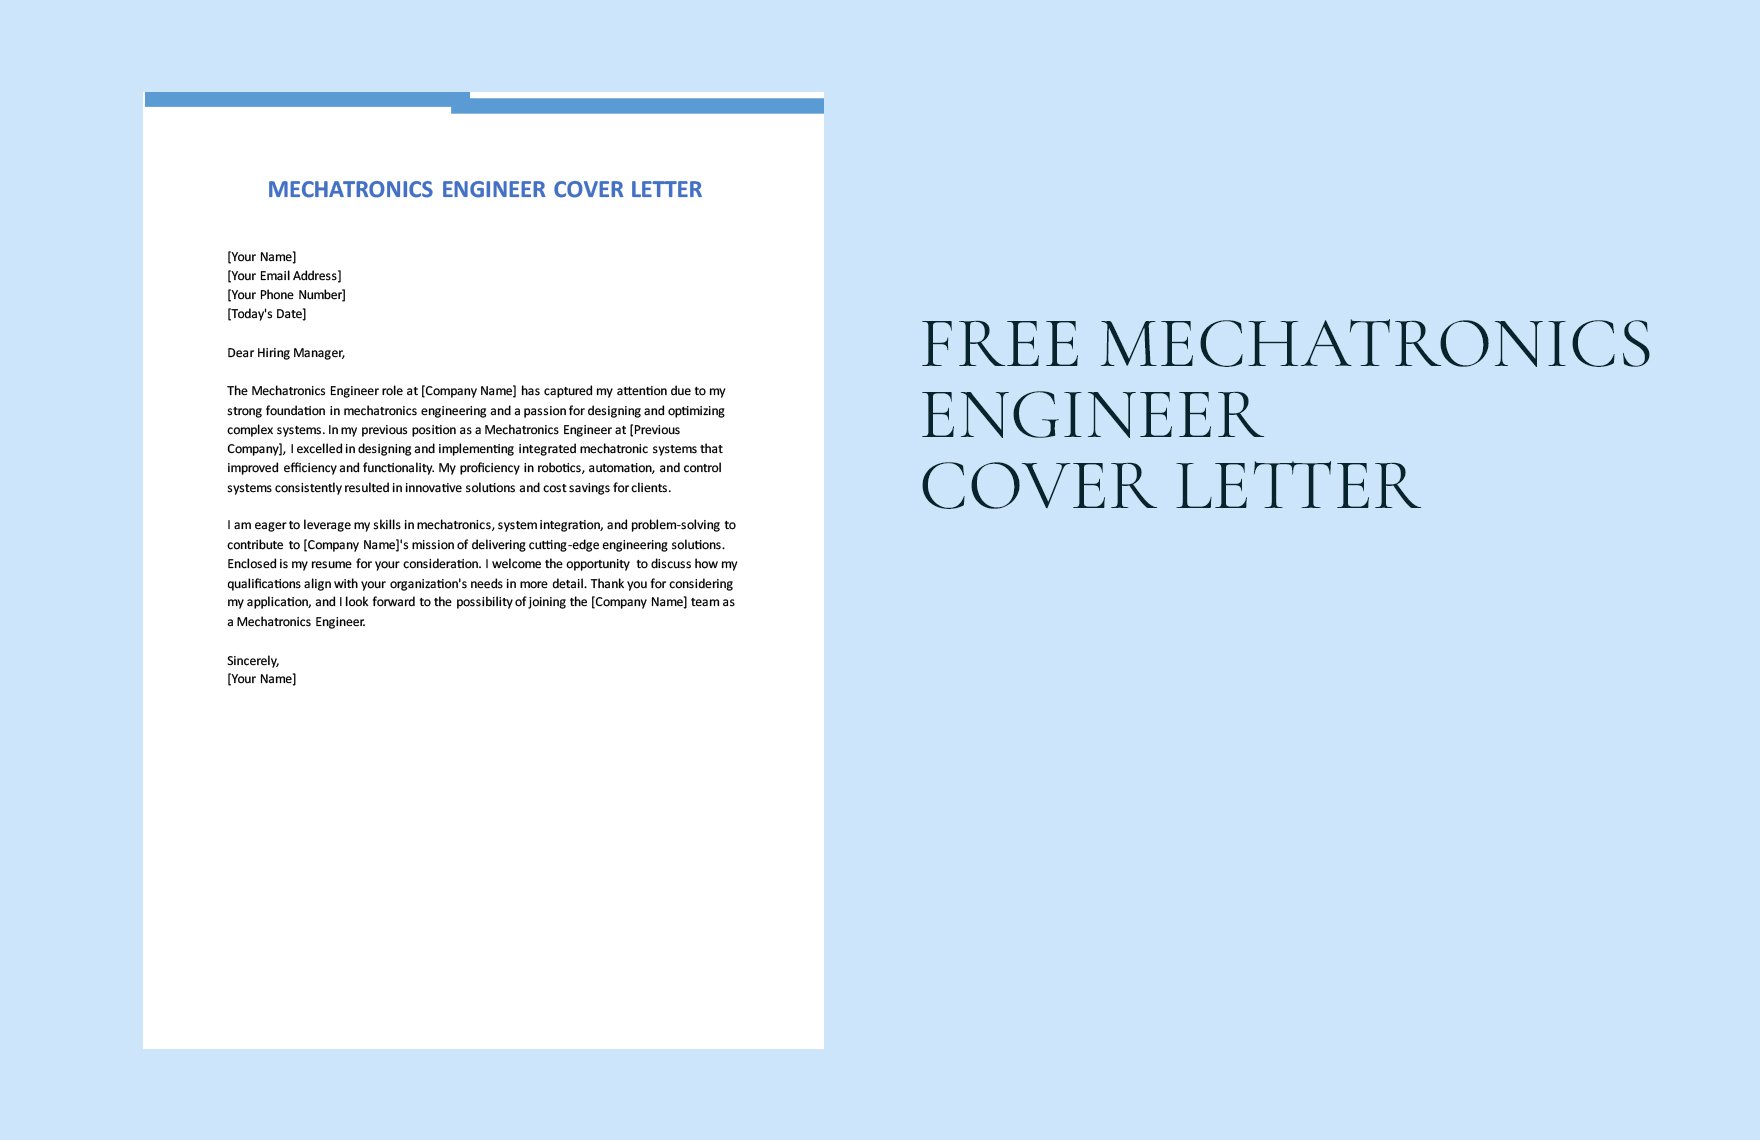 Mechatronics Engineer Cover Letter in Word, Google Docs, PDF